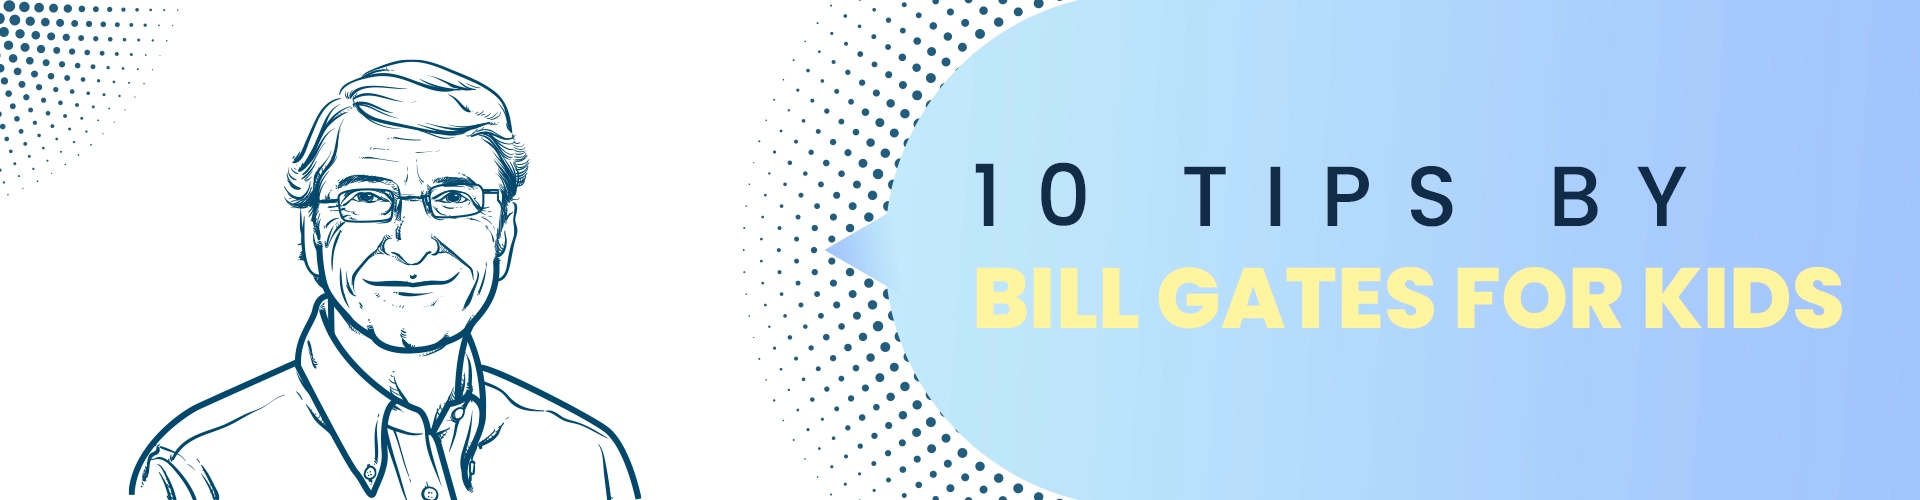 10 Tips by Bill Gates for Kids